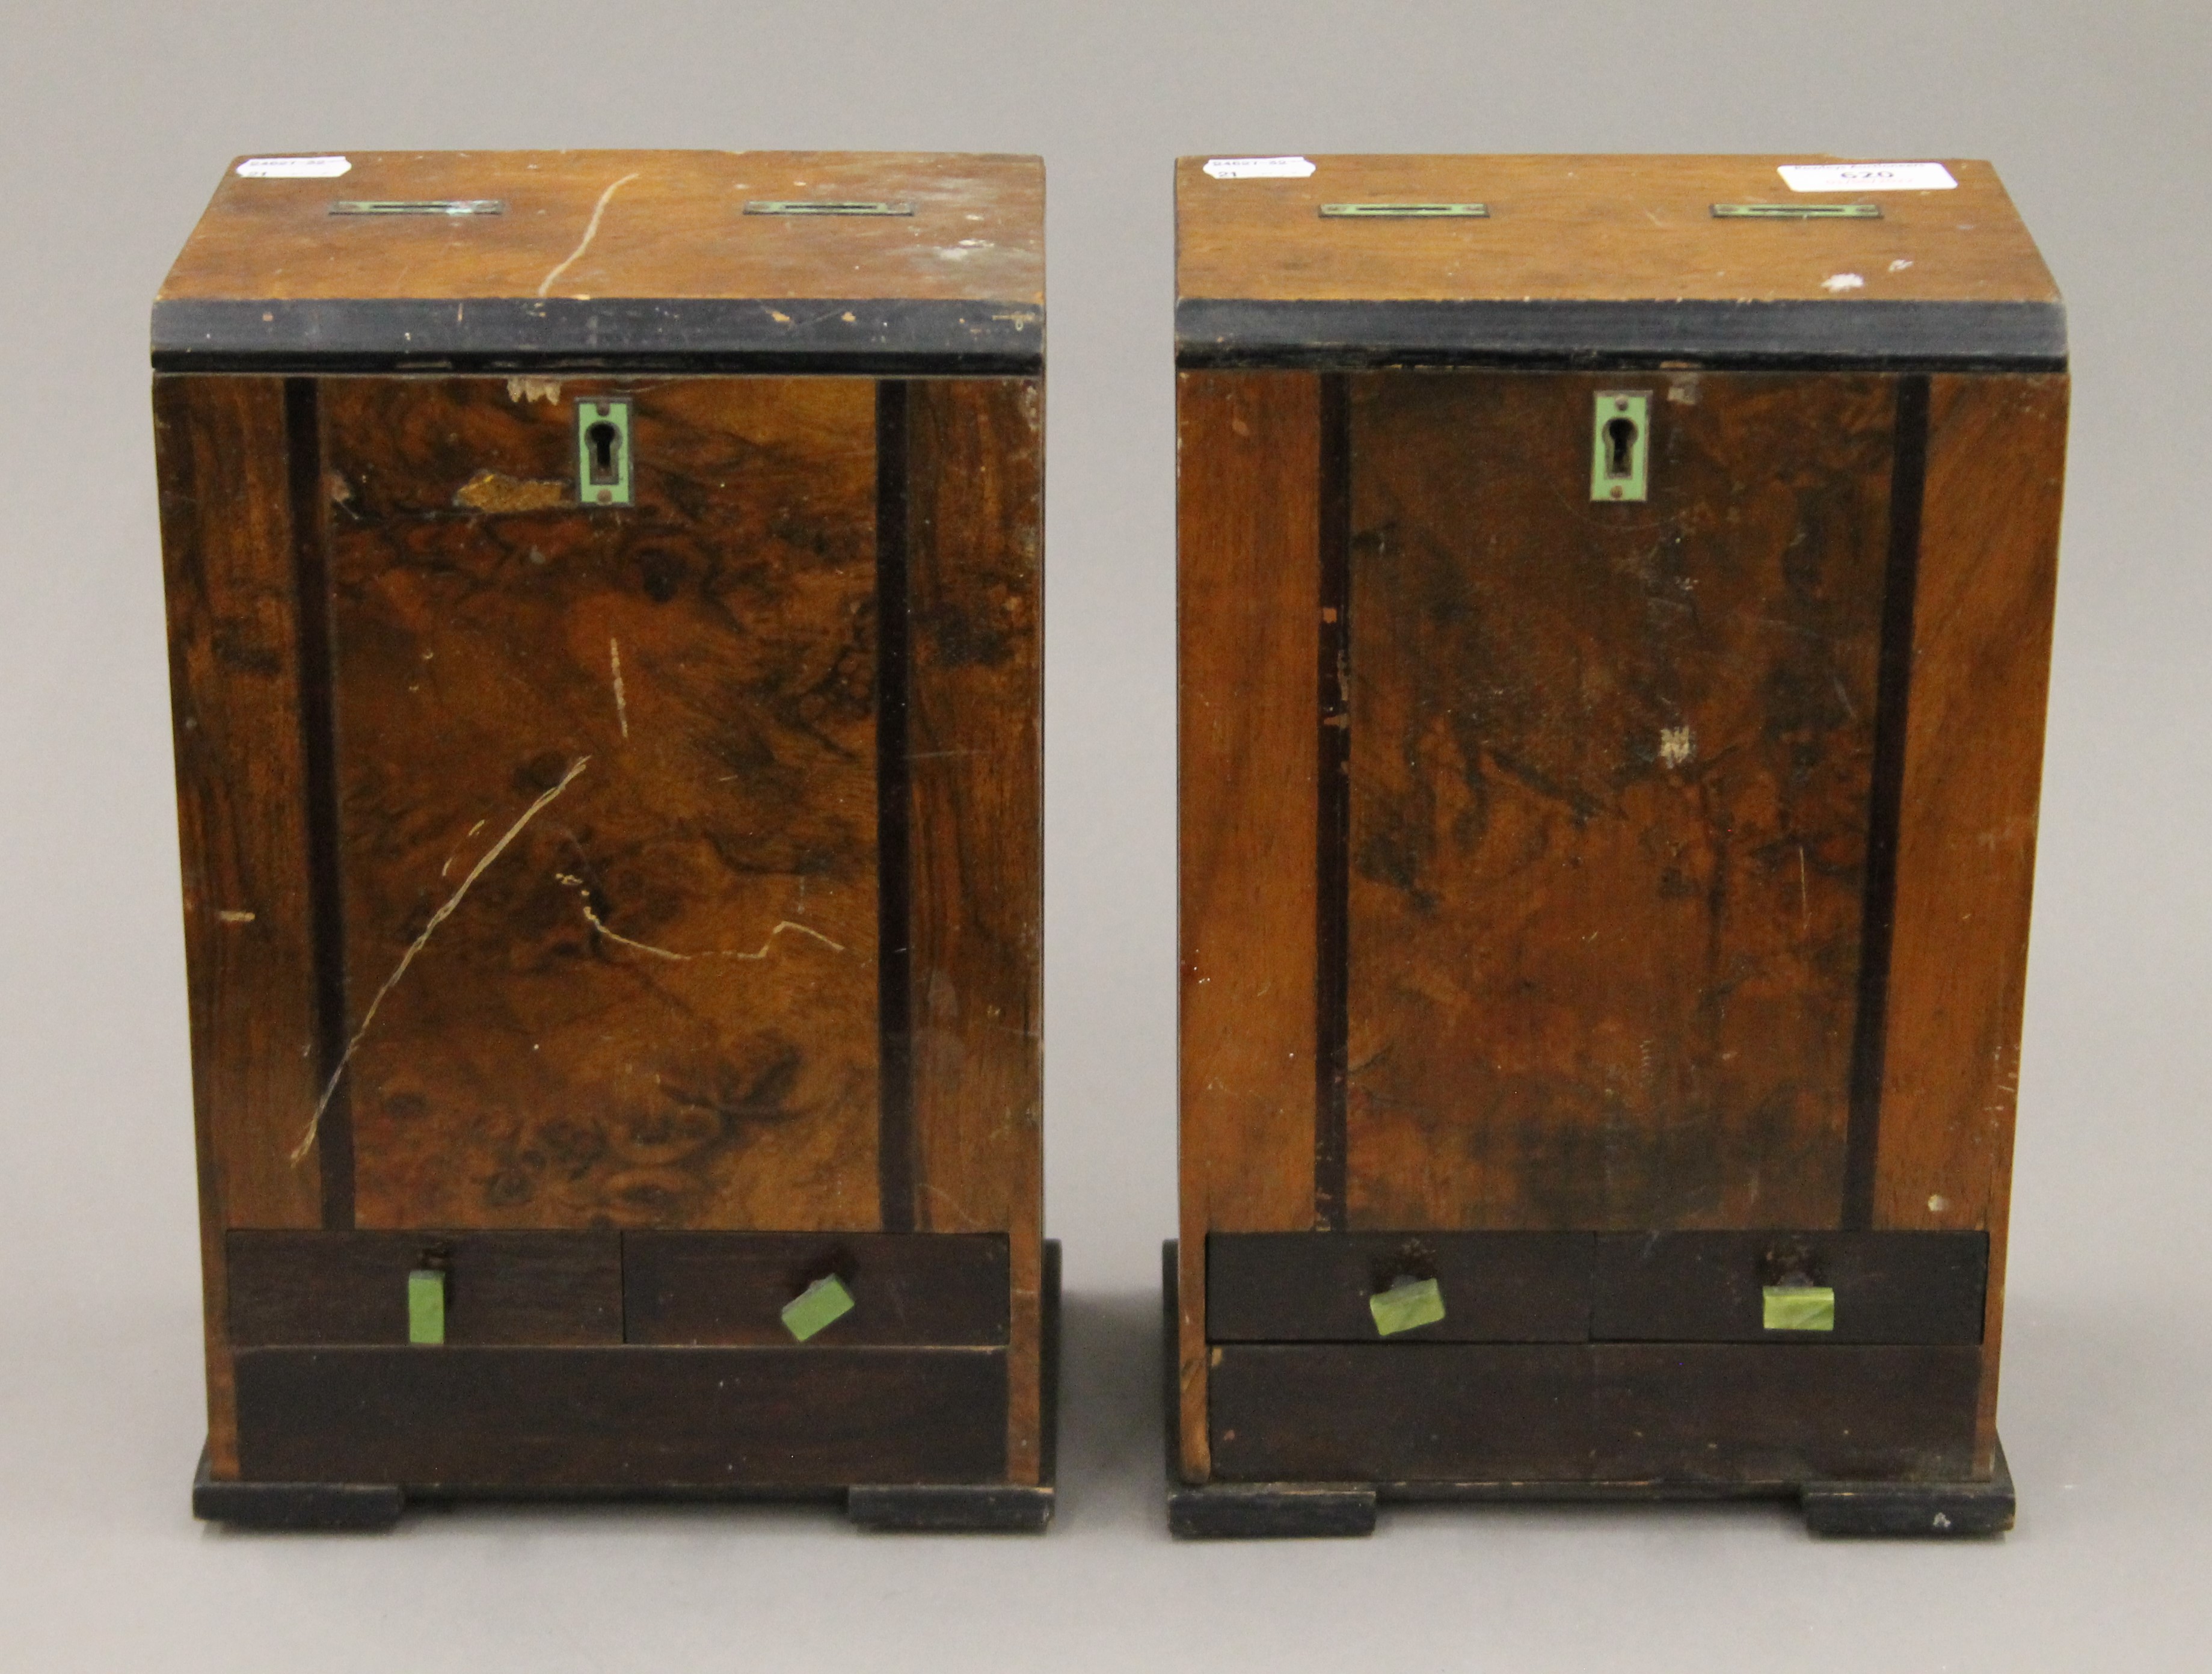 A pair of cigarette packet coin operated dispensers. 29.5 cm high.